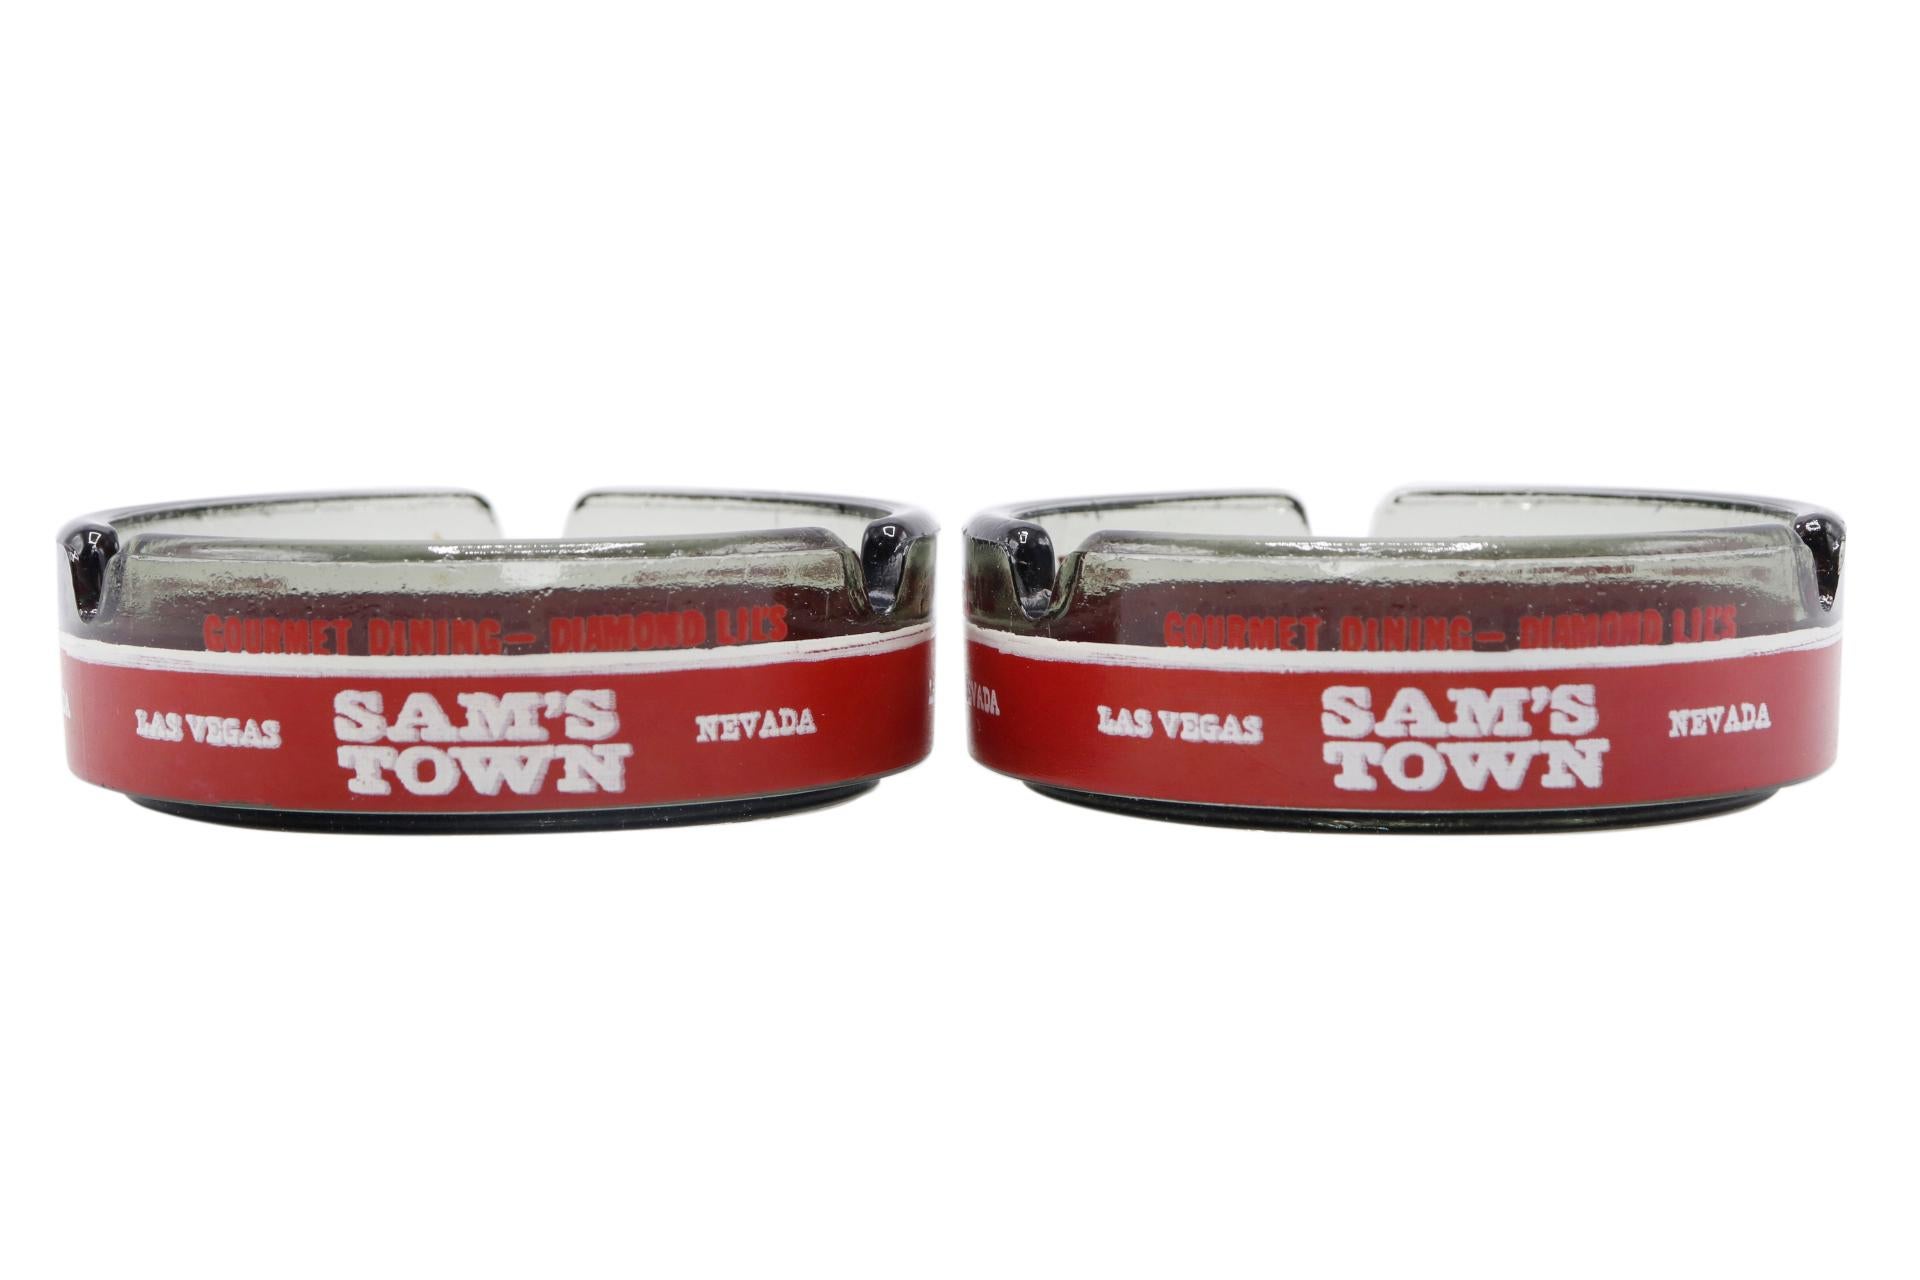 A pair of gray glass ashtrays branded Sam's Town, Las Vegas, Nevada. The bases are decorated with concentric circles and the outside with red lettering and white lettering on a white background. Sam's Town Hotel and Gambling Hall, abbreviated to